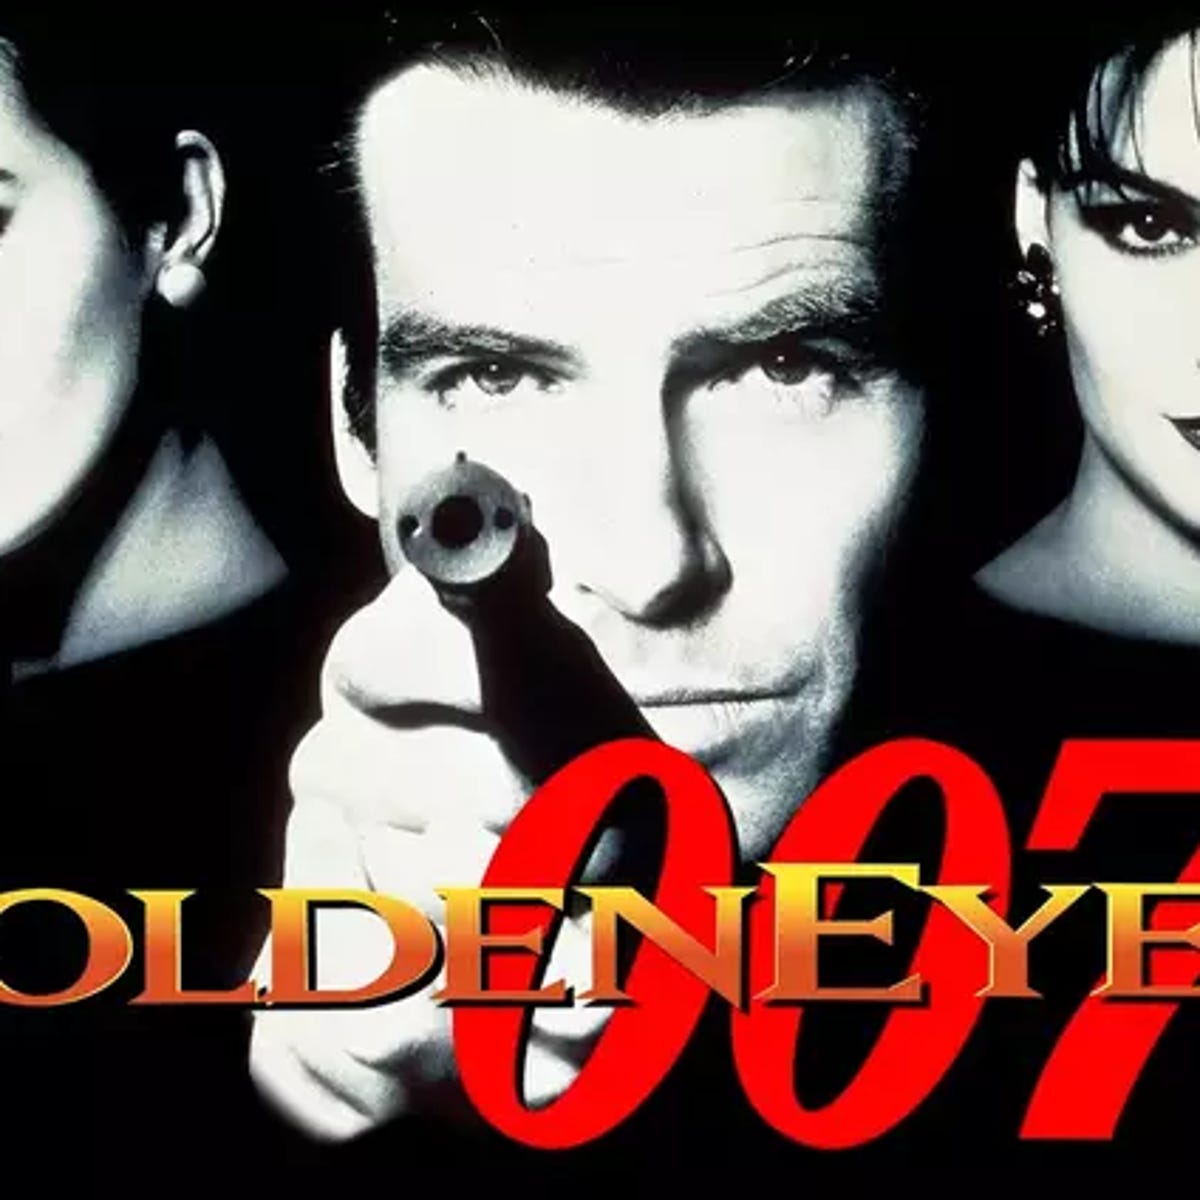 GoldenEye 007 Hits Nintendo Switch, Xbox: How to Play and Fix Switch  Controls - CNET